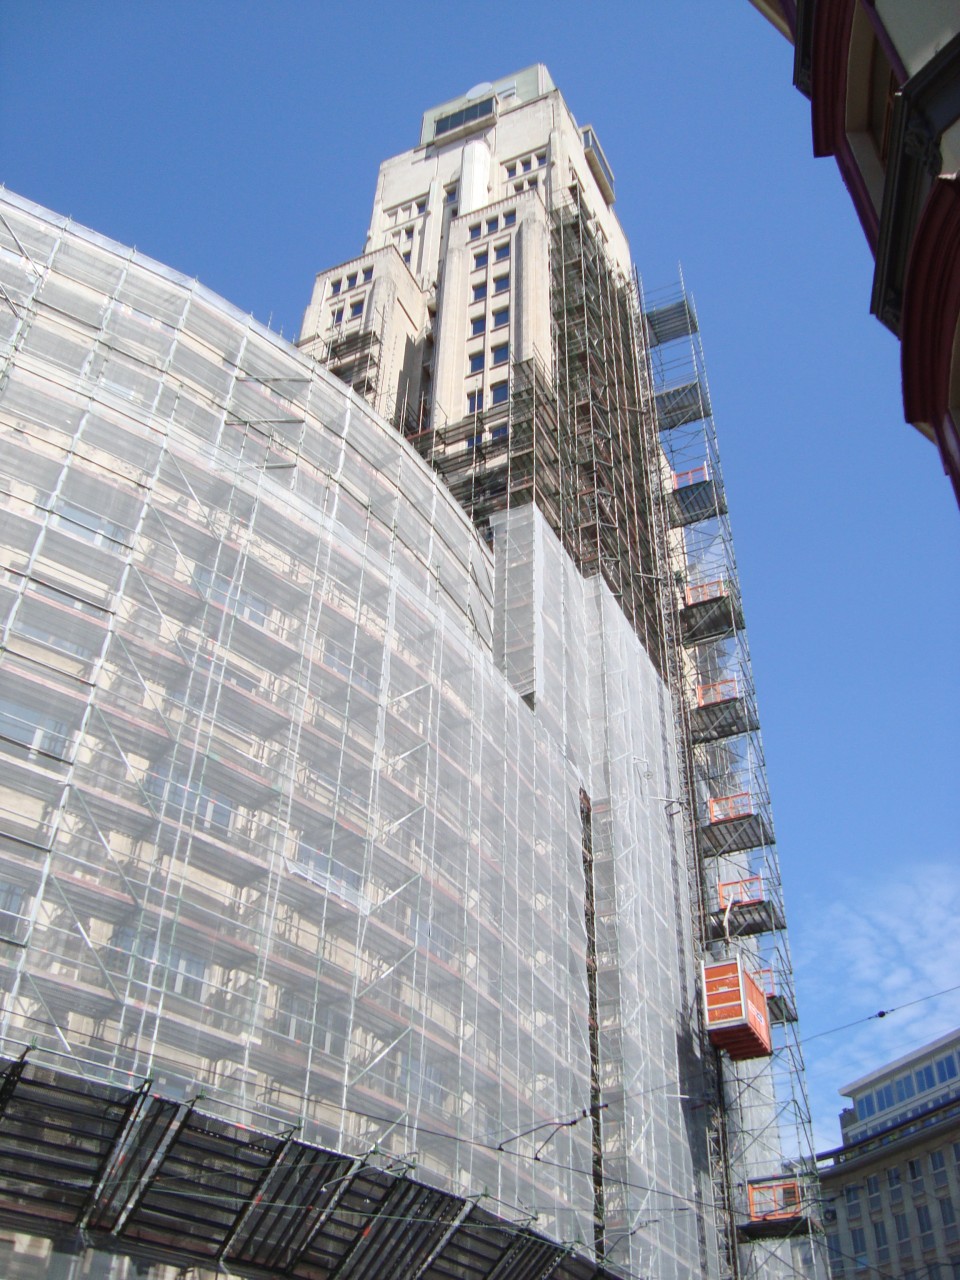 Ebonex, impressed current system to do cathodic protection of KBC tower in Antwerp